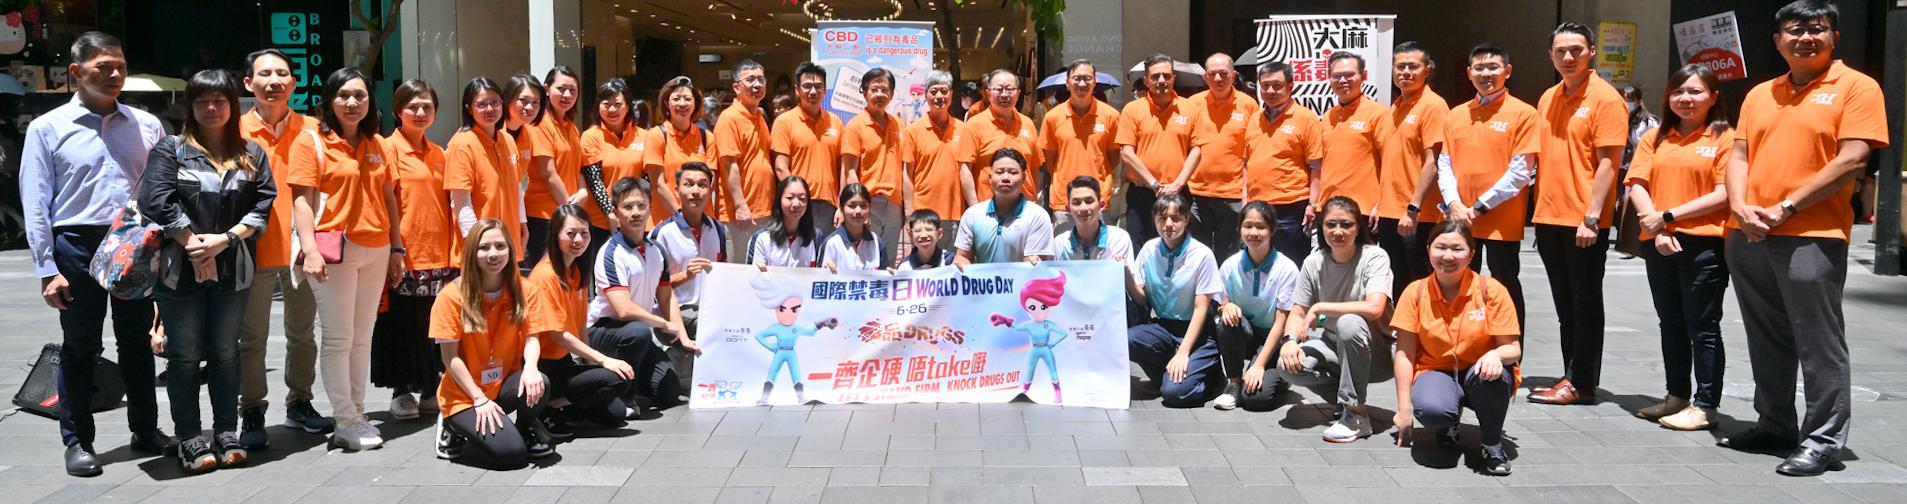 To echo the International Day against Drug Abuse and Illicit Trafficking, the Action Committee Against Narcotics (ACAN) held a preventive education and publicity event today (June 26) to unite different sectors of the community in the fight against drugs. Photo shows the Chairman of the ACAN, Dr Donald Li (back row, 11th right); the Commissioner for Narcotics, Mr Kesson Lee (back row, 10th right); and the Chairman of the ACAN Sub-committee on Preventive Education and Publicity, Mr Chan Wing-kin (back row, 12th right), together with other participants of the event after chanting the anti-drug slogan "Let's Stand Firm. Knock Drugs Out" to show their determination to fight against drugs together.